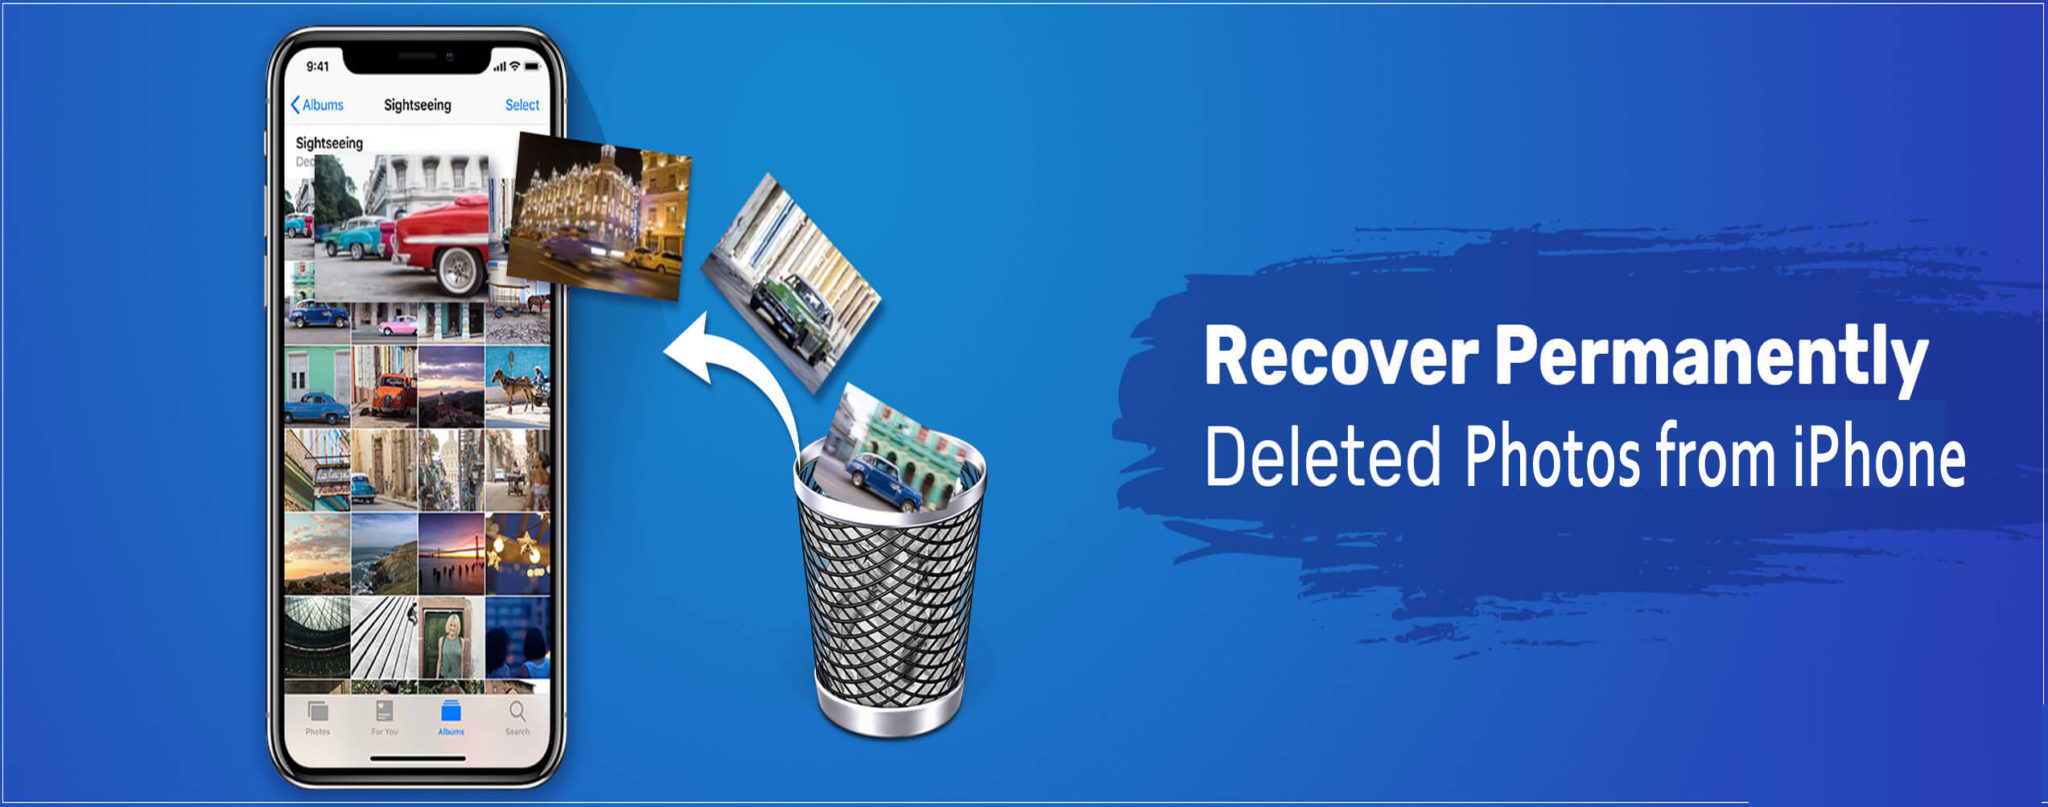 How to Recover Permanently Deleted Photos From iPhone